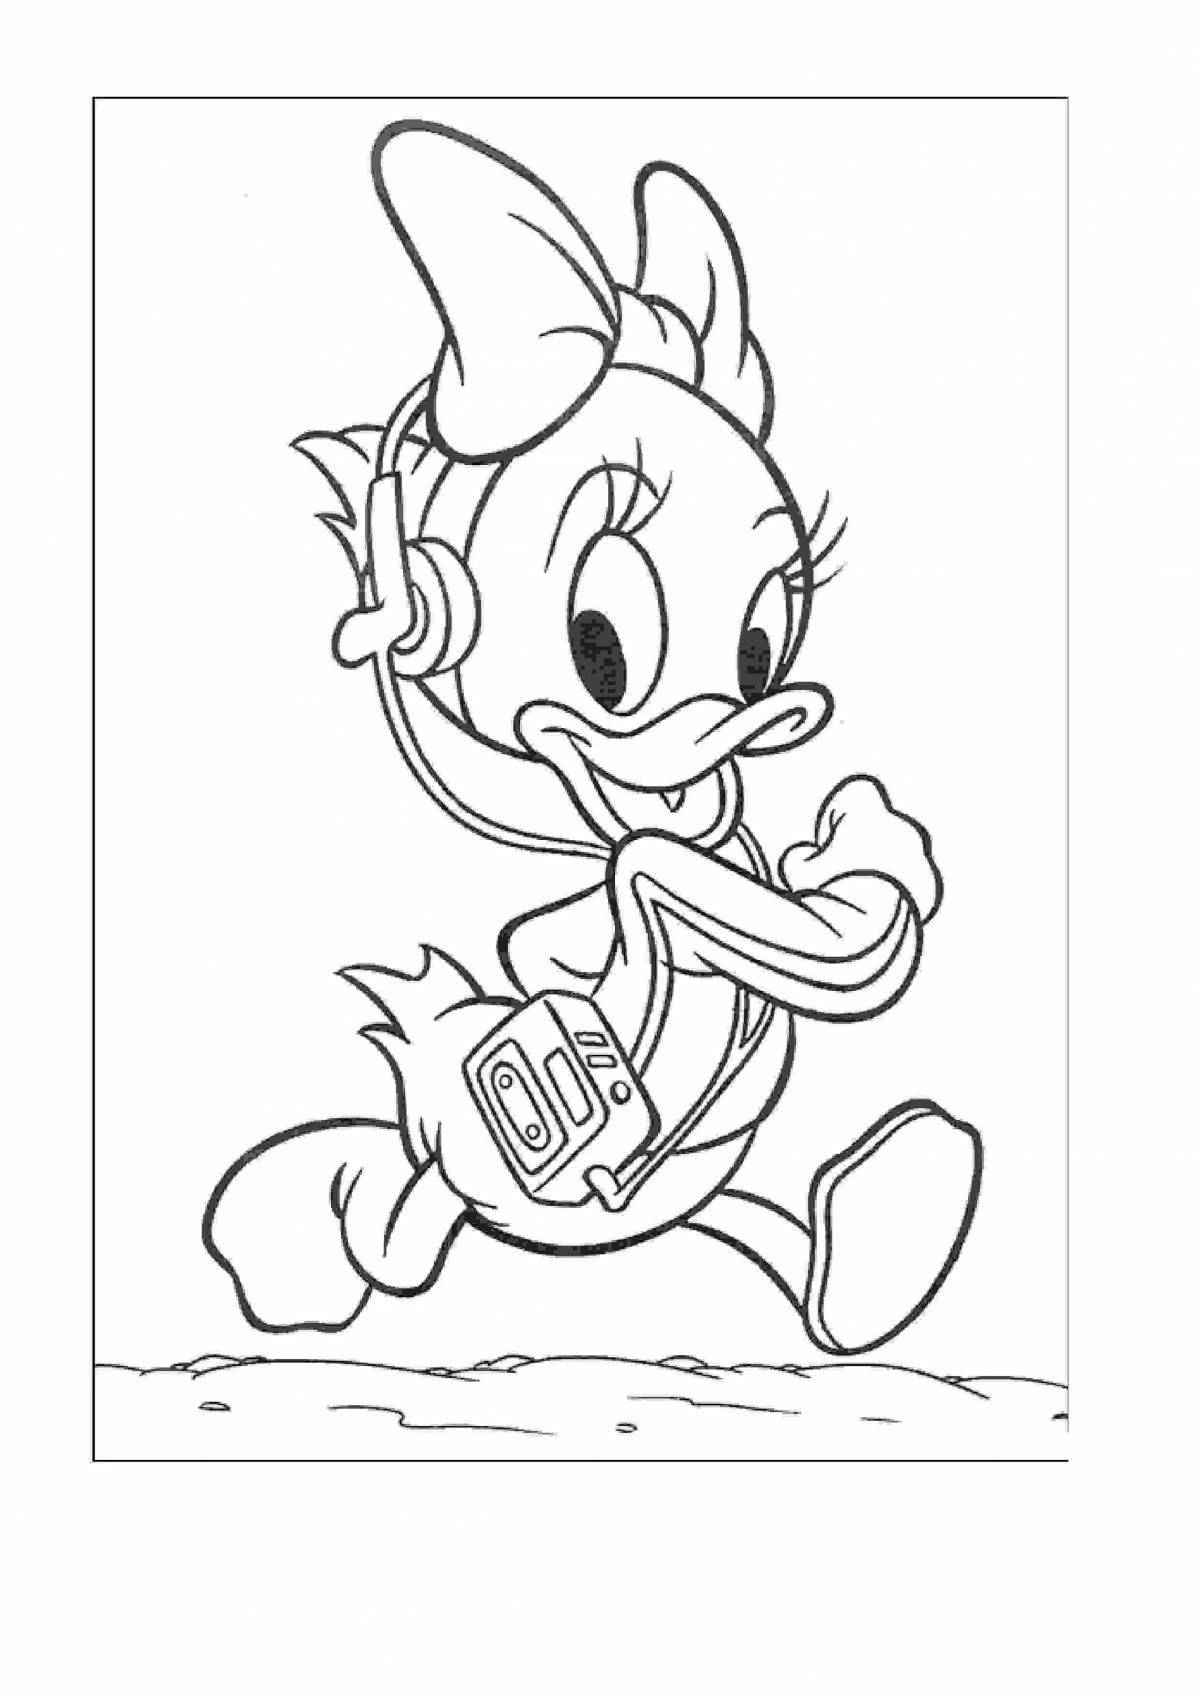 Charming killy willy coloring book